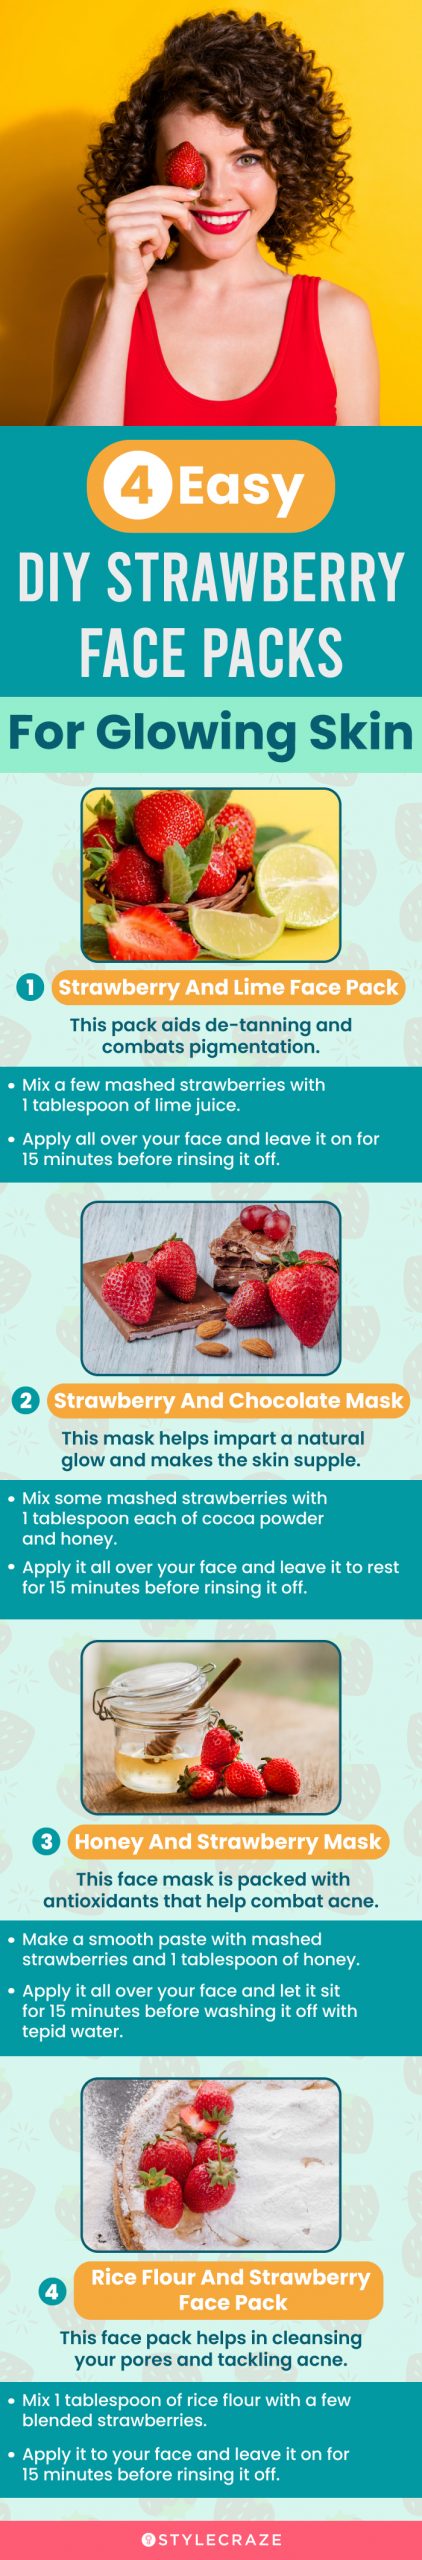 4 easy diy strawberry face packs for glowing skin (infographic)